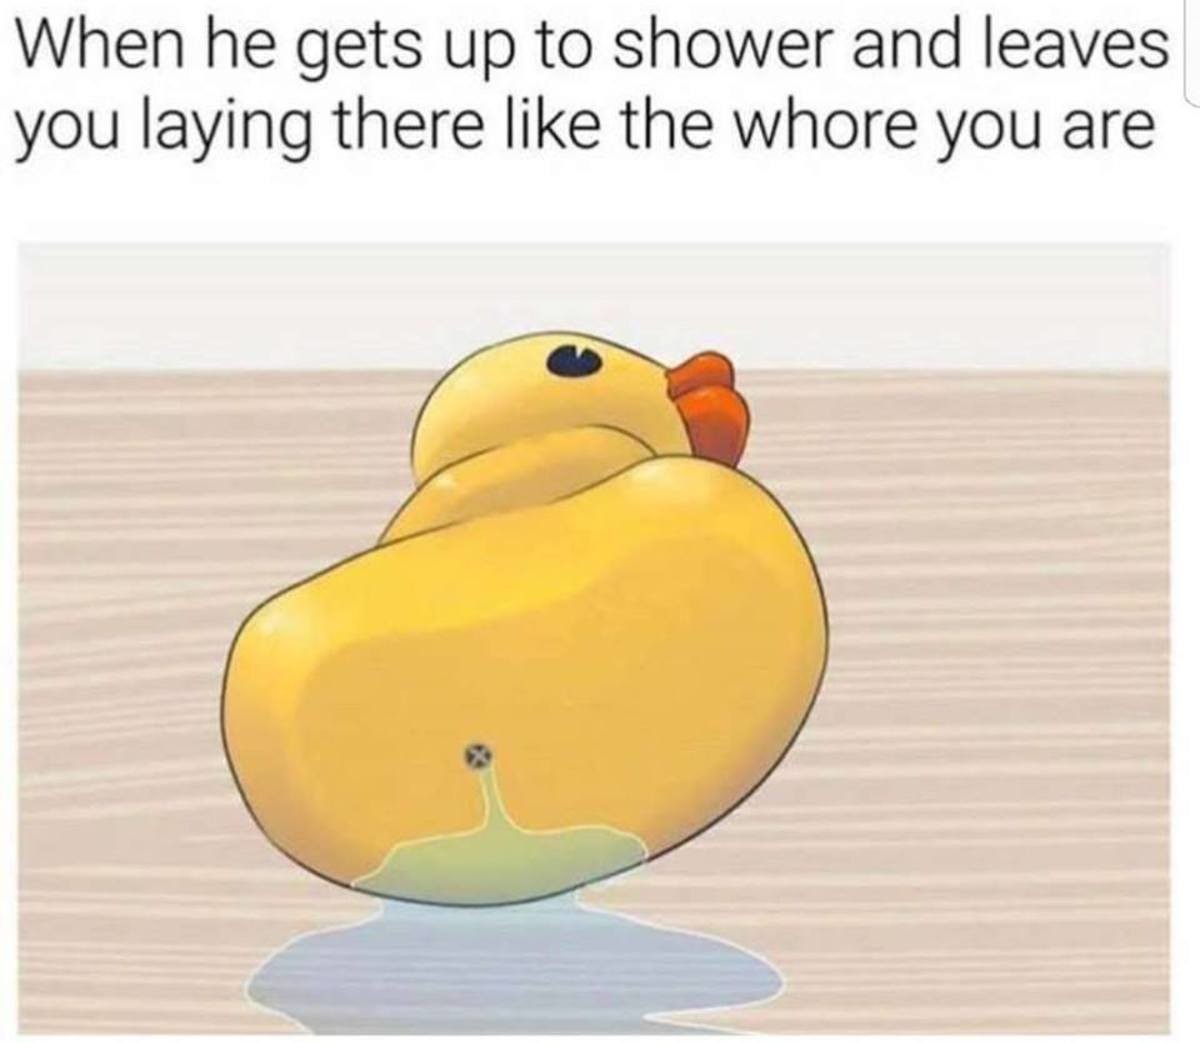 Funniest sex meme a rubber ducky on its side draining water with the text 'when he gets up to shower and leaves you laying there like the whore you are'